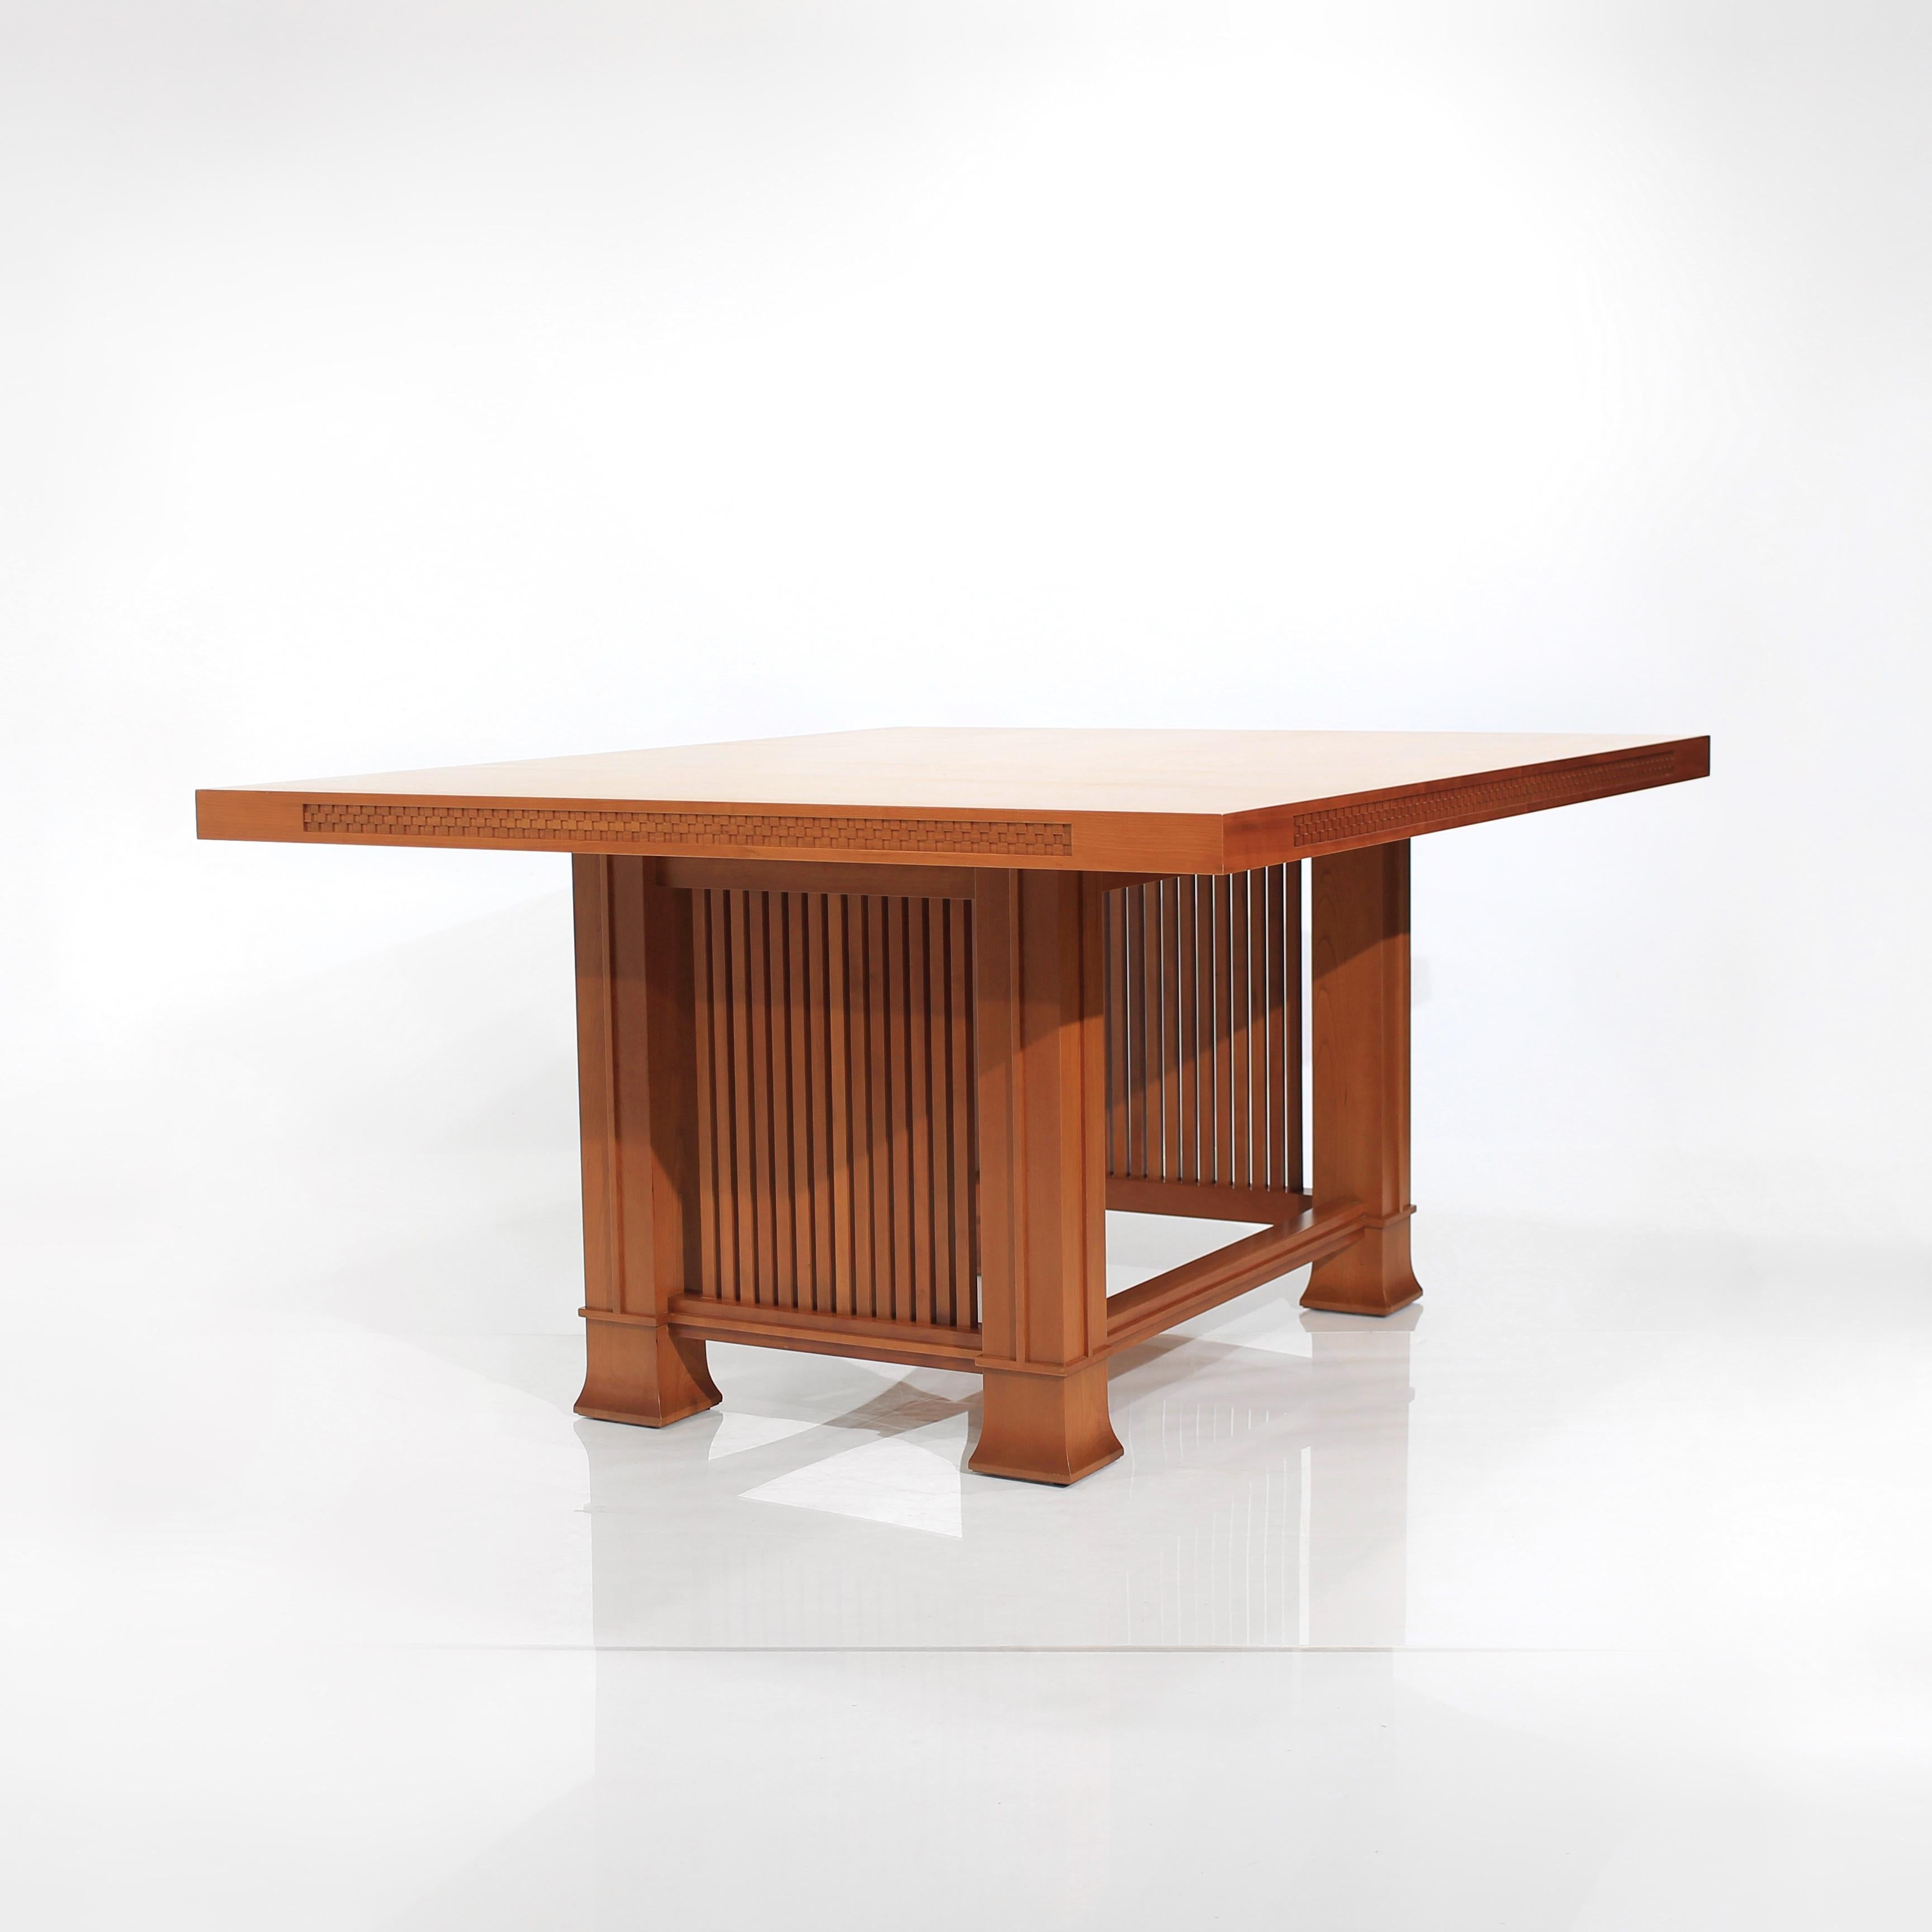 About this Frank Lloyd Wright dining table - Model name: Husser comprised of solid lacquered cherrywood. Designed by Frank Lloyd Wright in 1899 for the Joseph W. Husser House (Chicago, Illinois), re-edited by the Italian manufacturer Cassina in